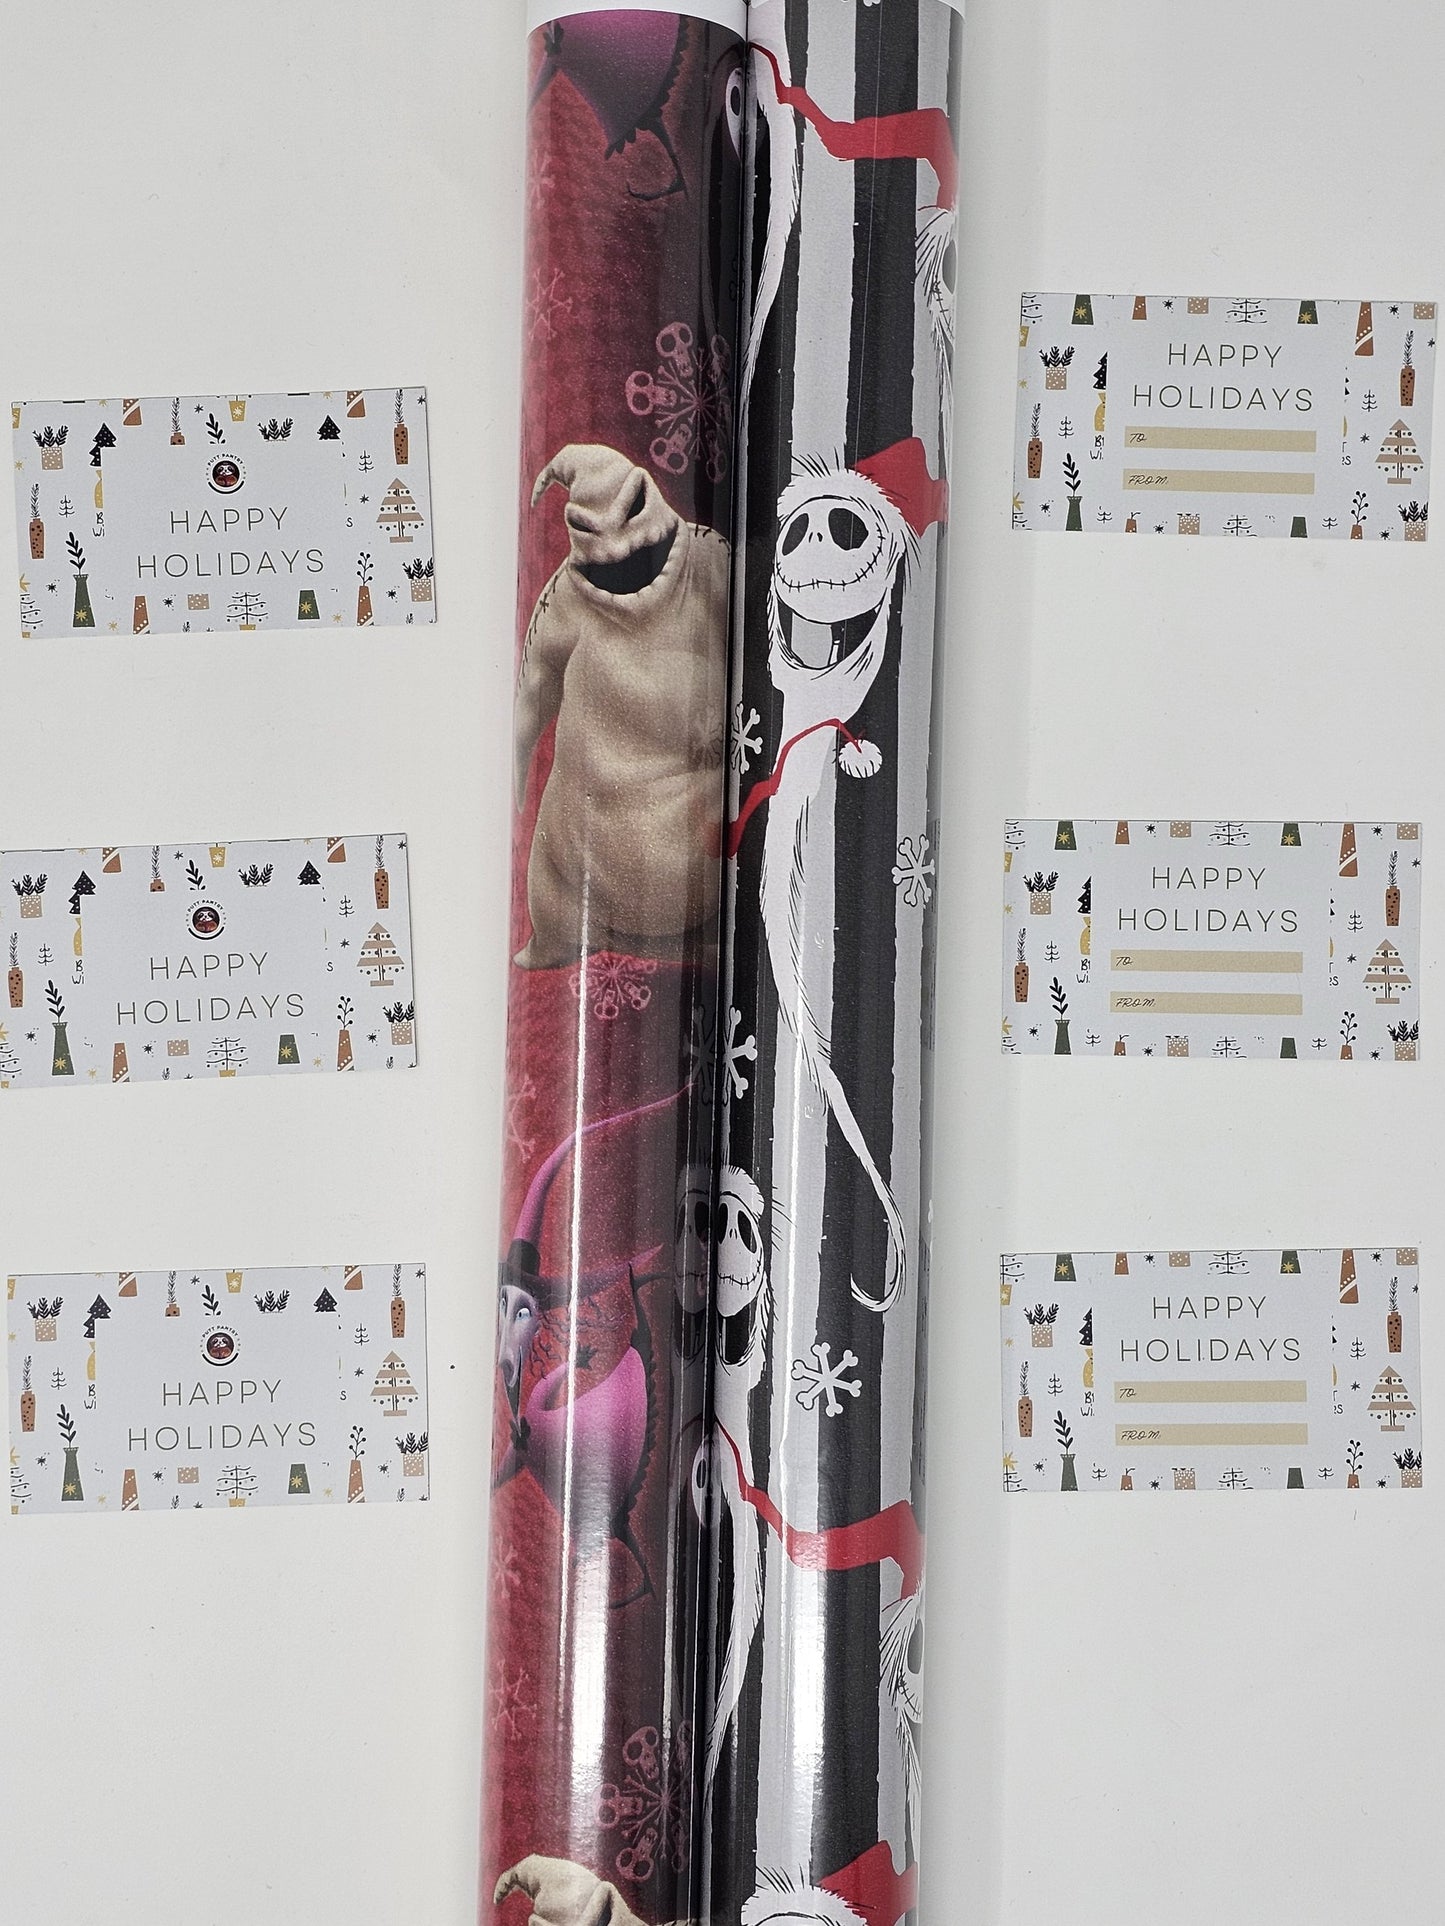 2 Rolls of Nightmare Before Christmas Wrapping Paper, 1 Roll 60 Sq Ft of Nightmare Before Christmas Jack Skellington Snowy Wrapping paper and 1 Roll 60 Sq Ft of Oogie Boogie, Barrel, Sally and Jack Skellington Wrapping Paper, With 6 Holiday Gift Tags.